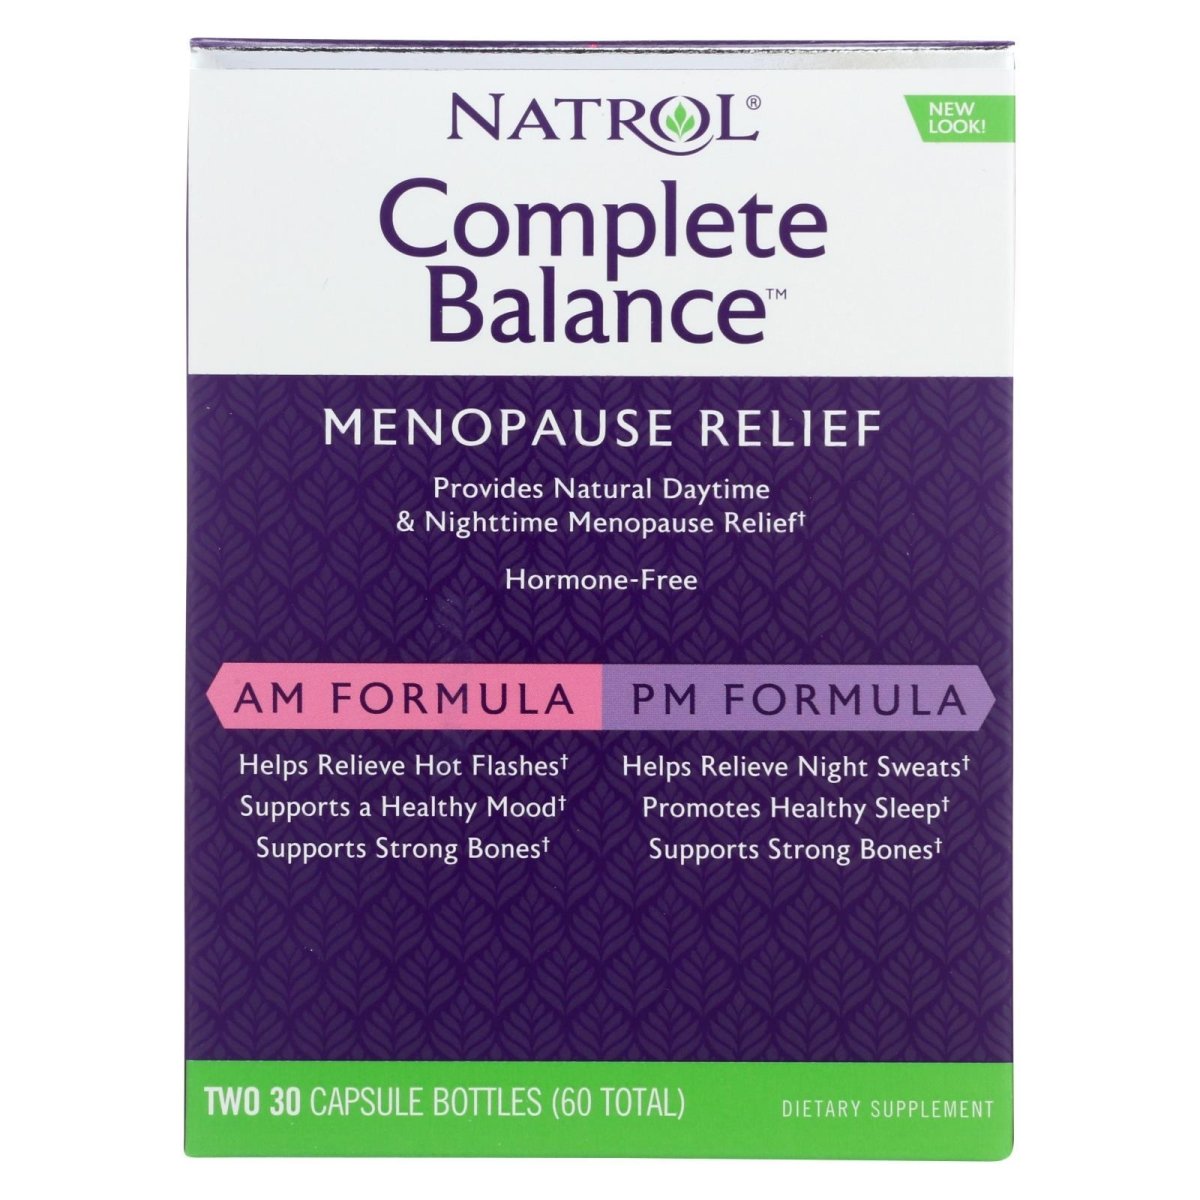 Complete Balance Menopause Relief 2 x 30 Capsule Bottles